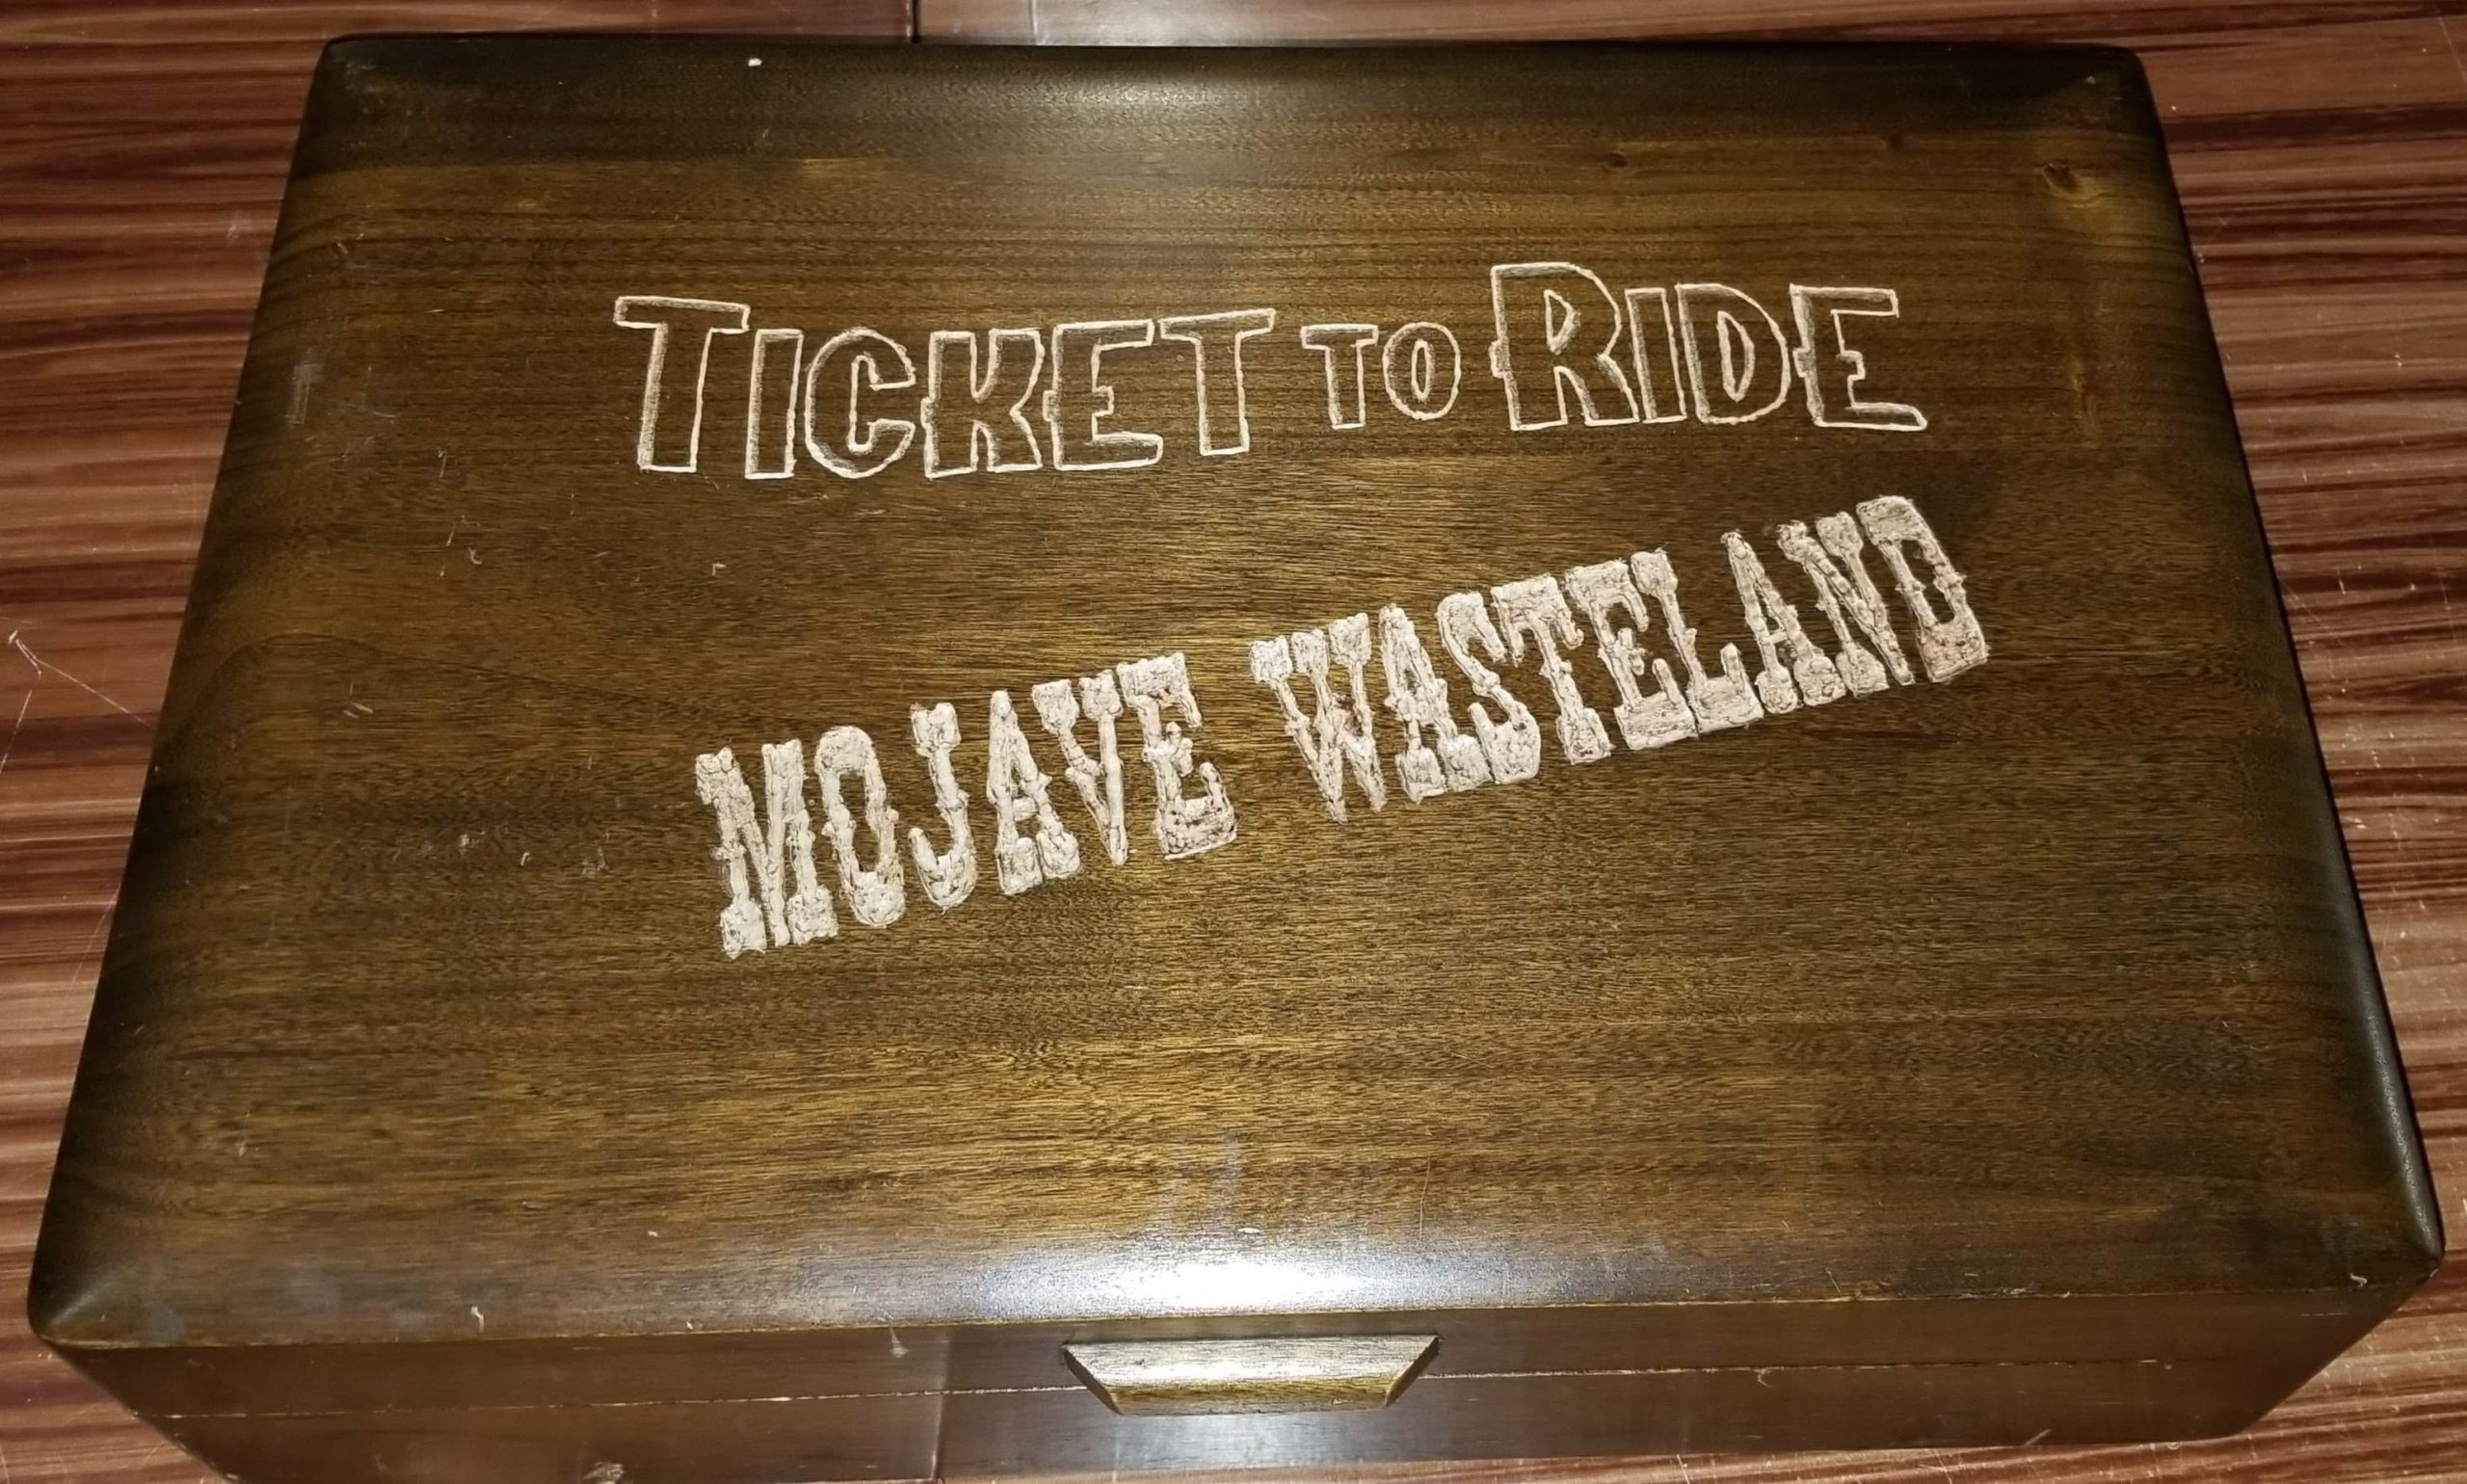 Fan Creates Fallout Version Of Ticket To Ride